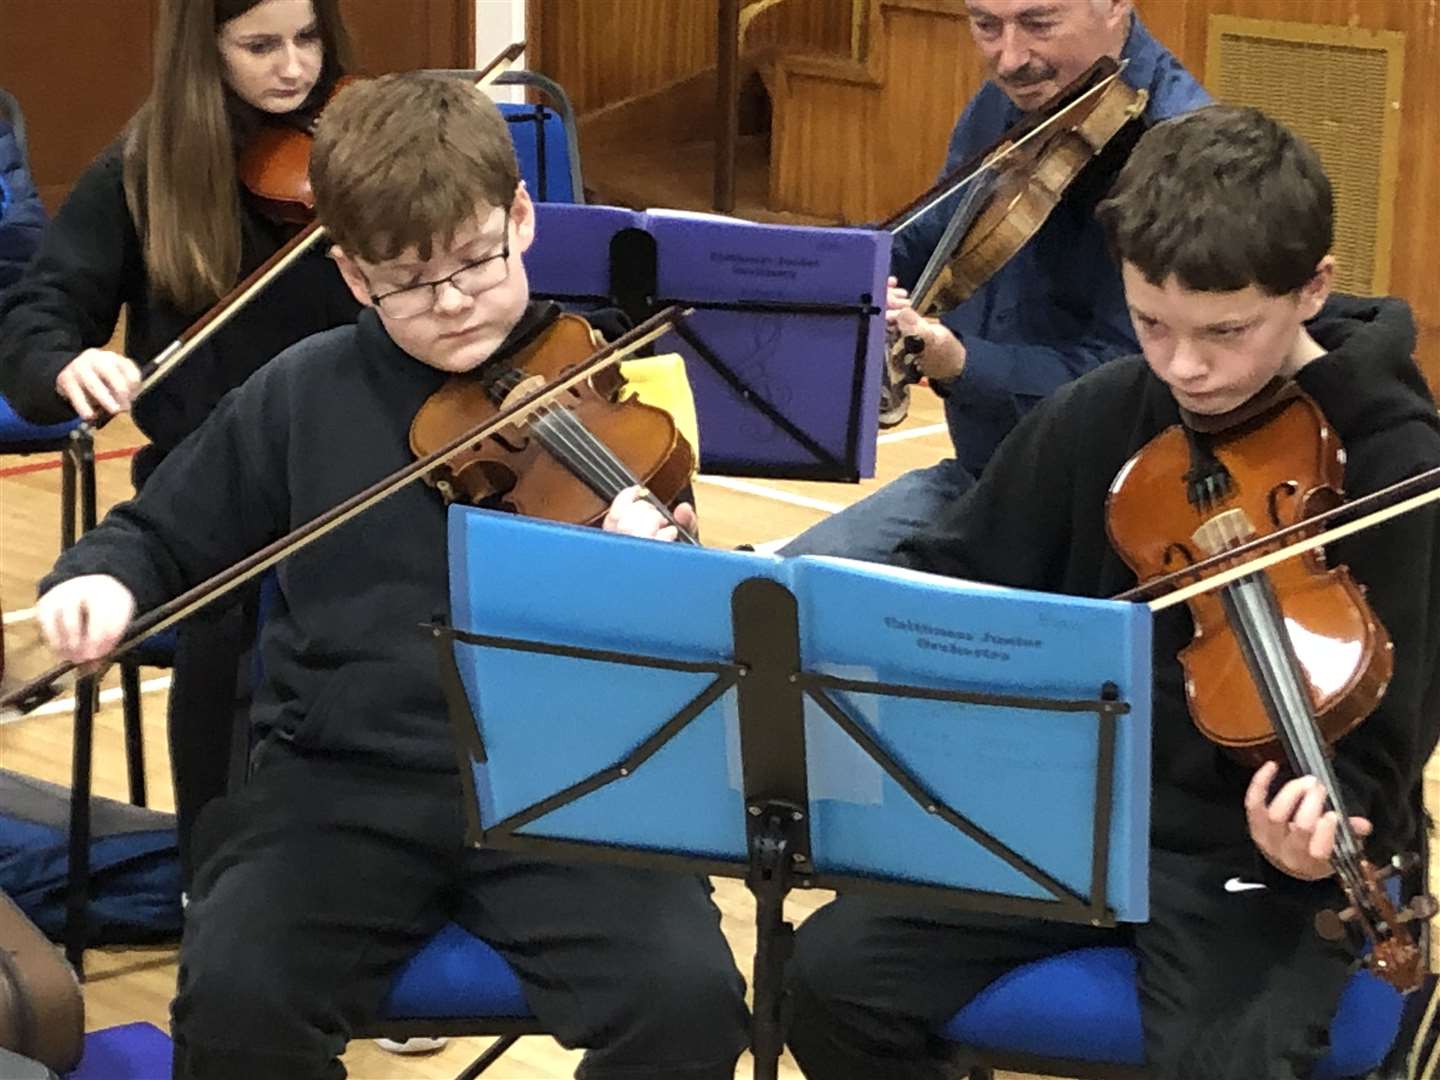 Arran Macleod (front left) plays in the Caithness Junior Orchestra.